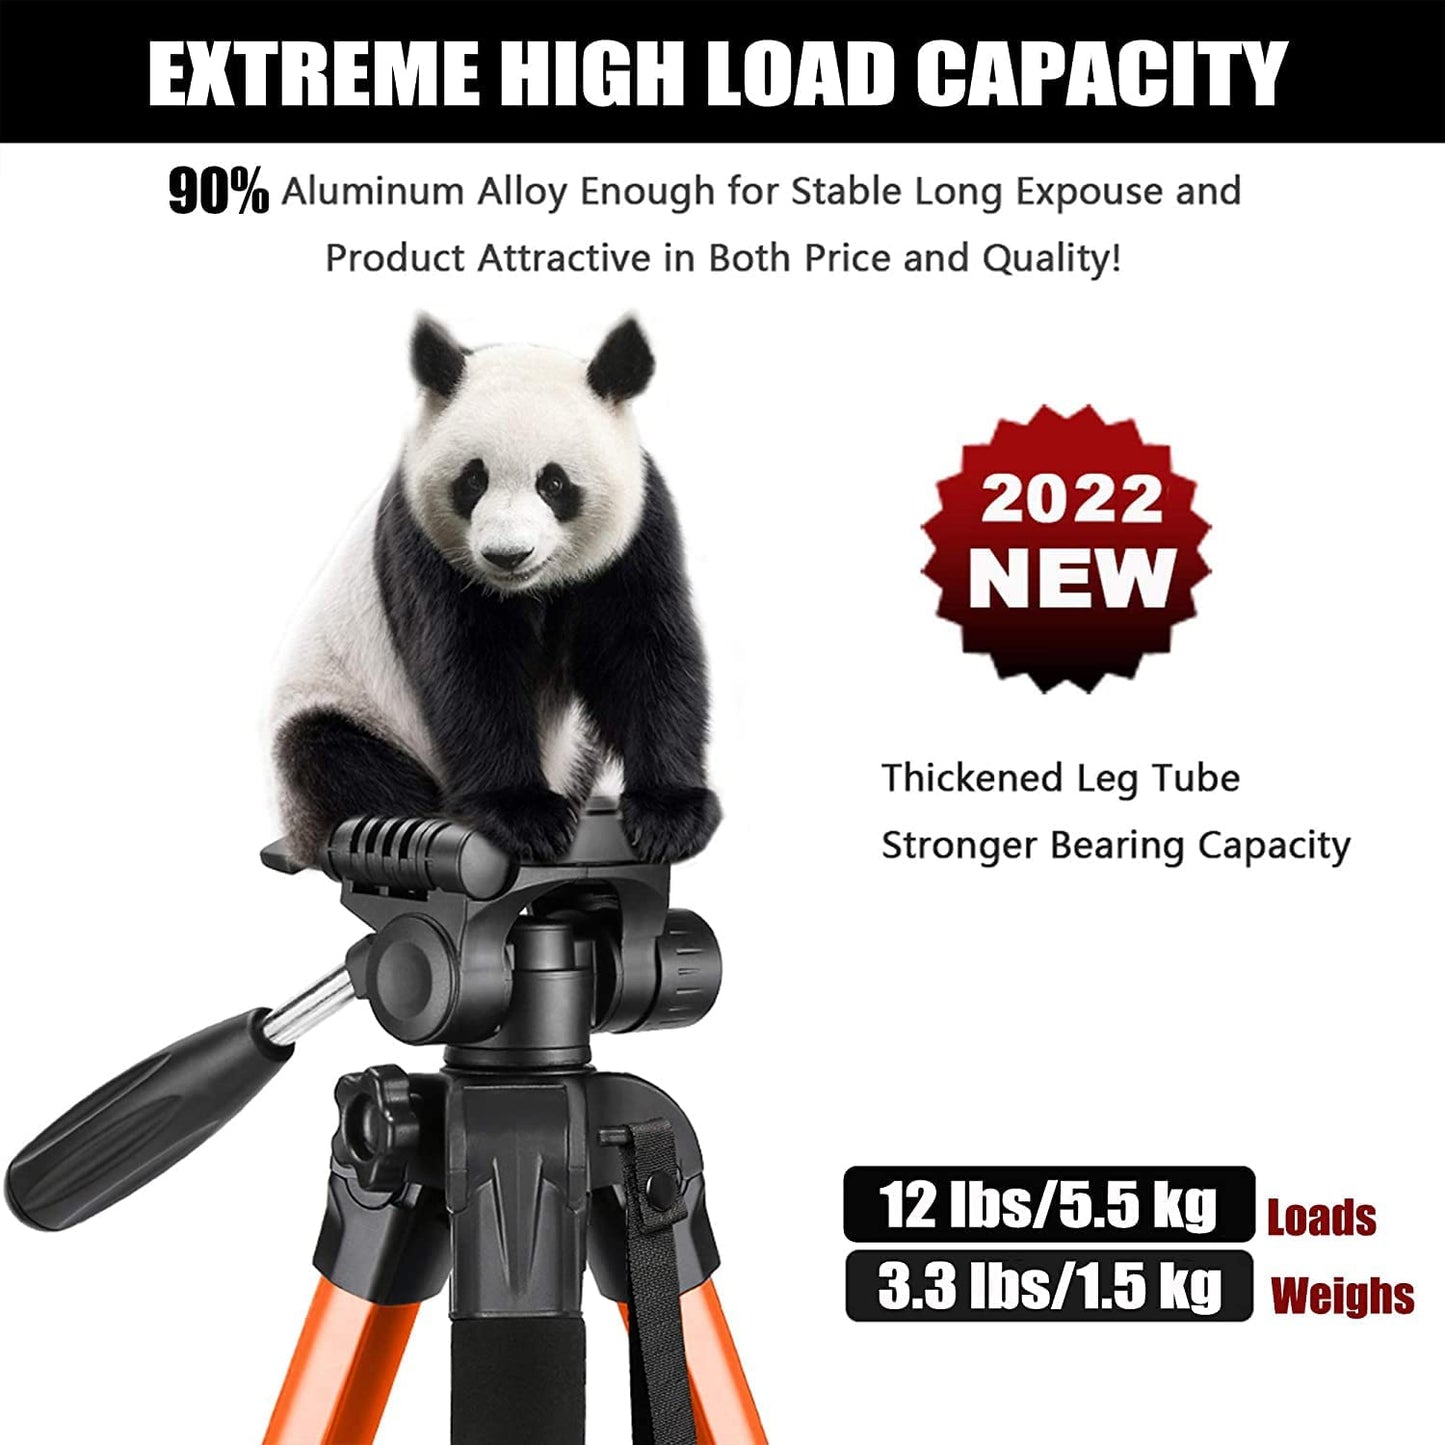 Victiv 72-inch Compact Tripod for Camera, Durable Aluminum Stand for YouTube Videos, Live Webcasts, Lightweight Monopod with 2 Quick Release Plates for DSLR - Orange